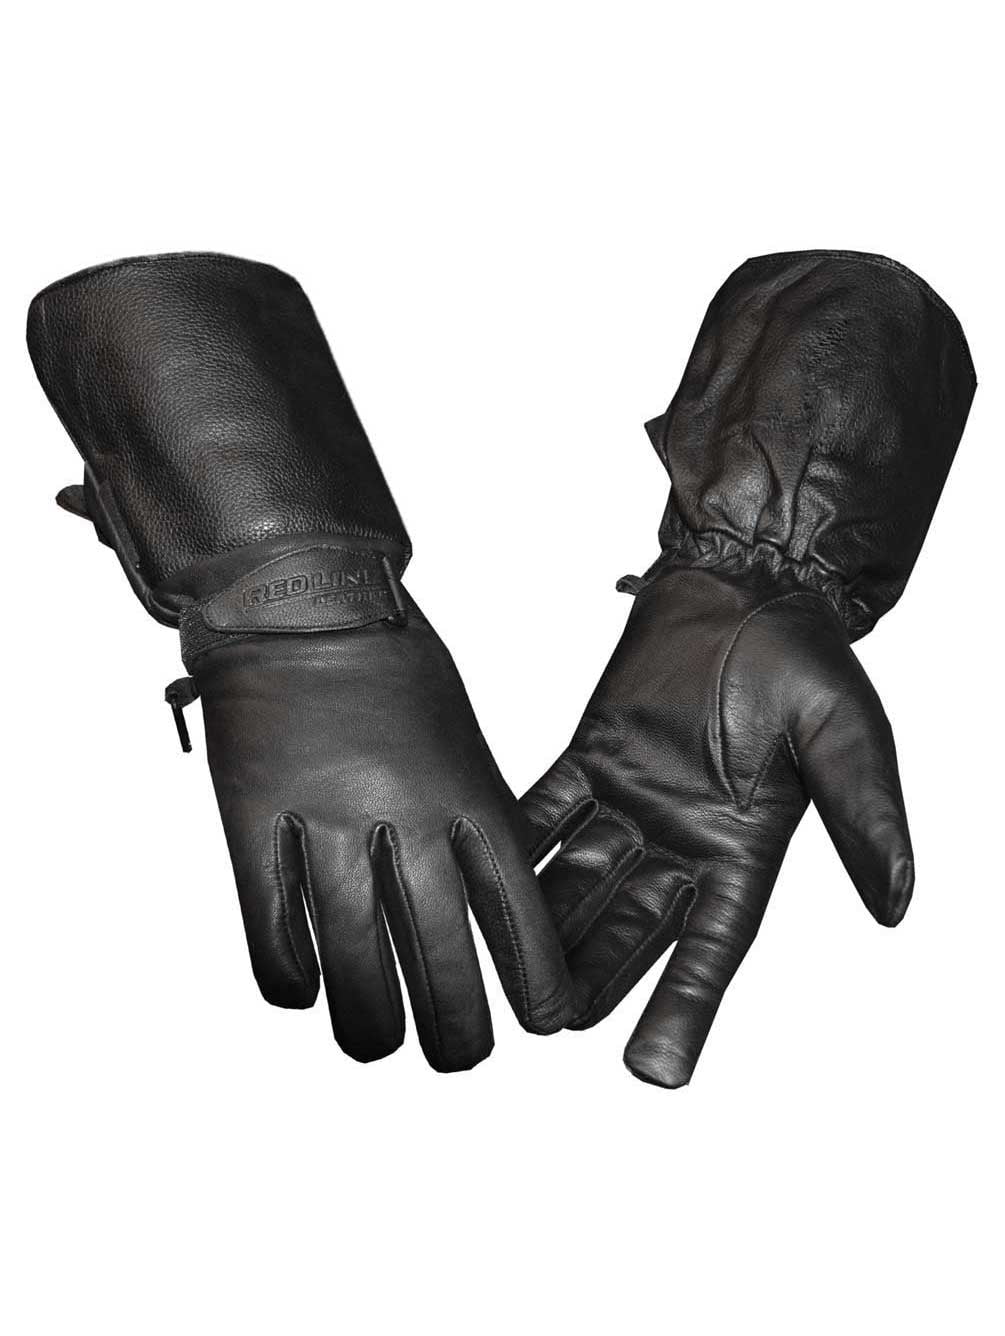 Raider Black Leather Gauntlet Motorcycle Riding Gloves for Men and Women Size X-Large 